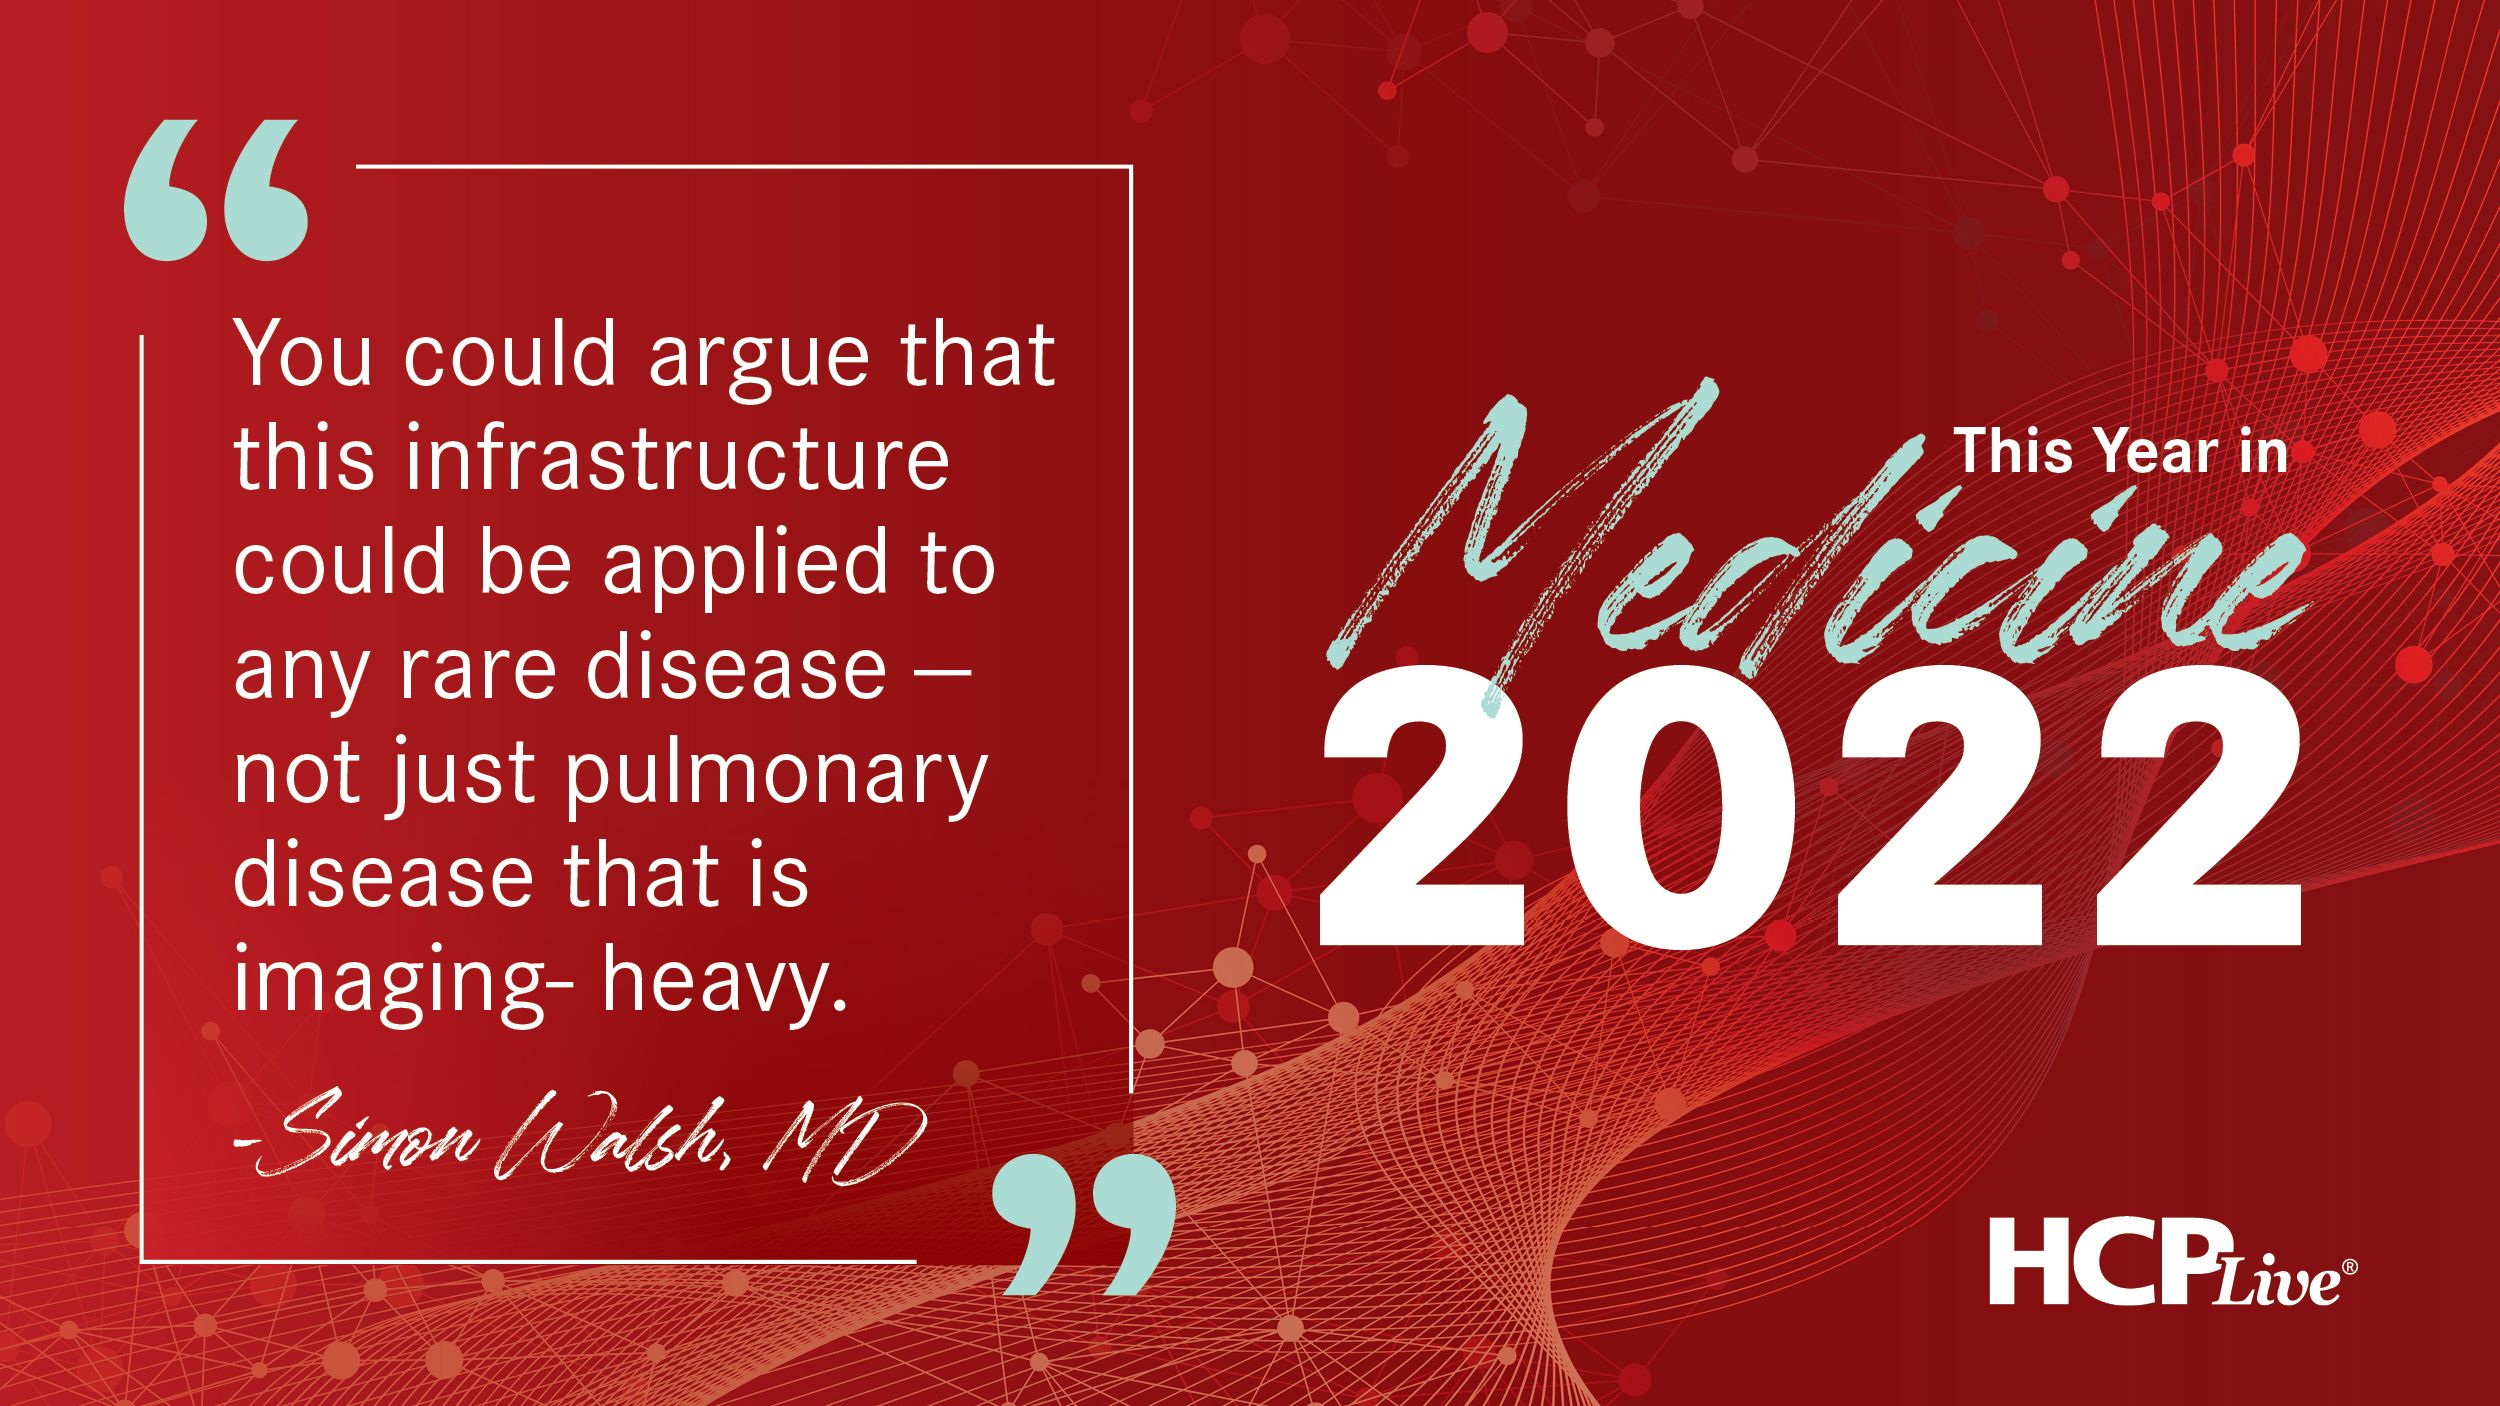 11 Experts' point of view on the future of medical specialties